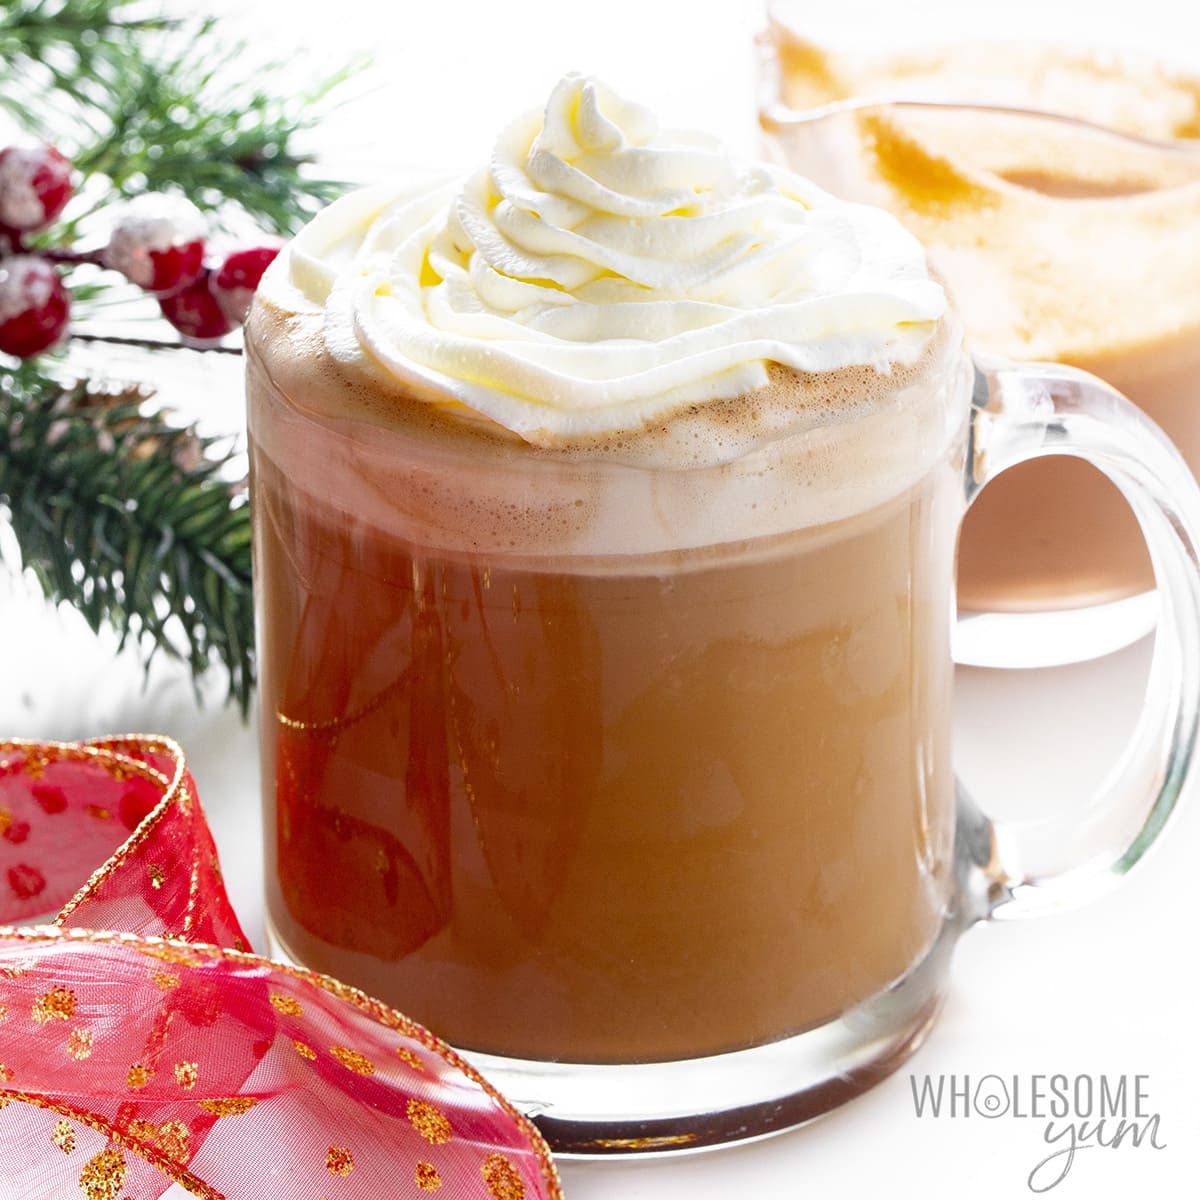 Sugar-free peppermint mocha creamer in a mug with coffee and whipped cream.